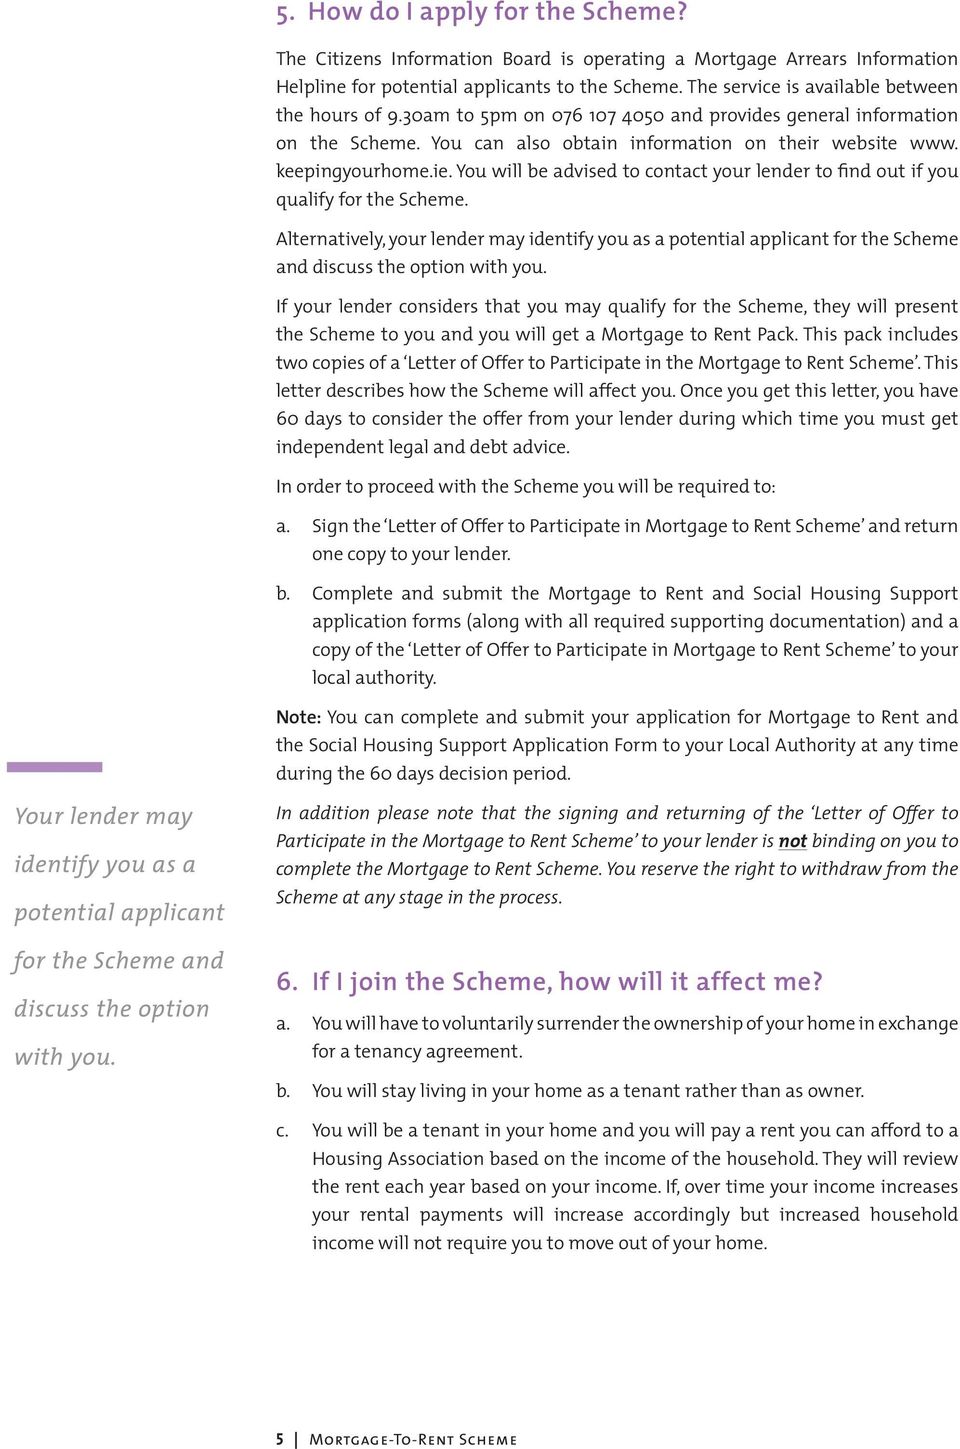 You will be advised to contact your lender to find out if you qualify for the Scheme.